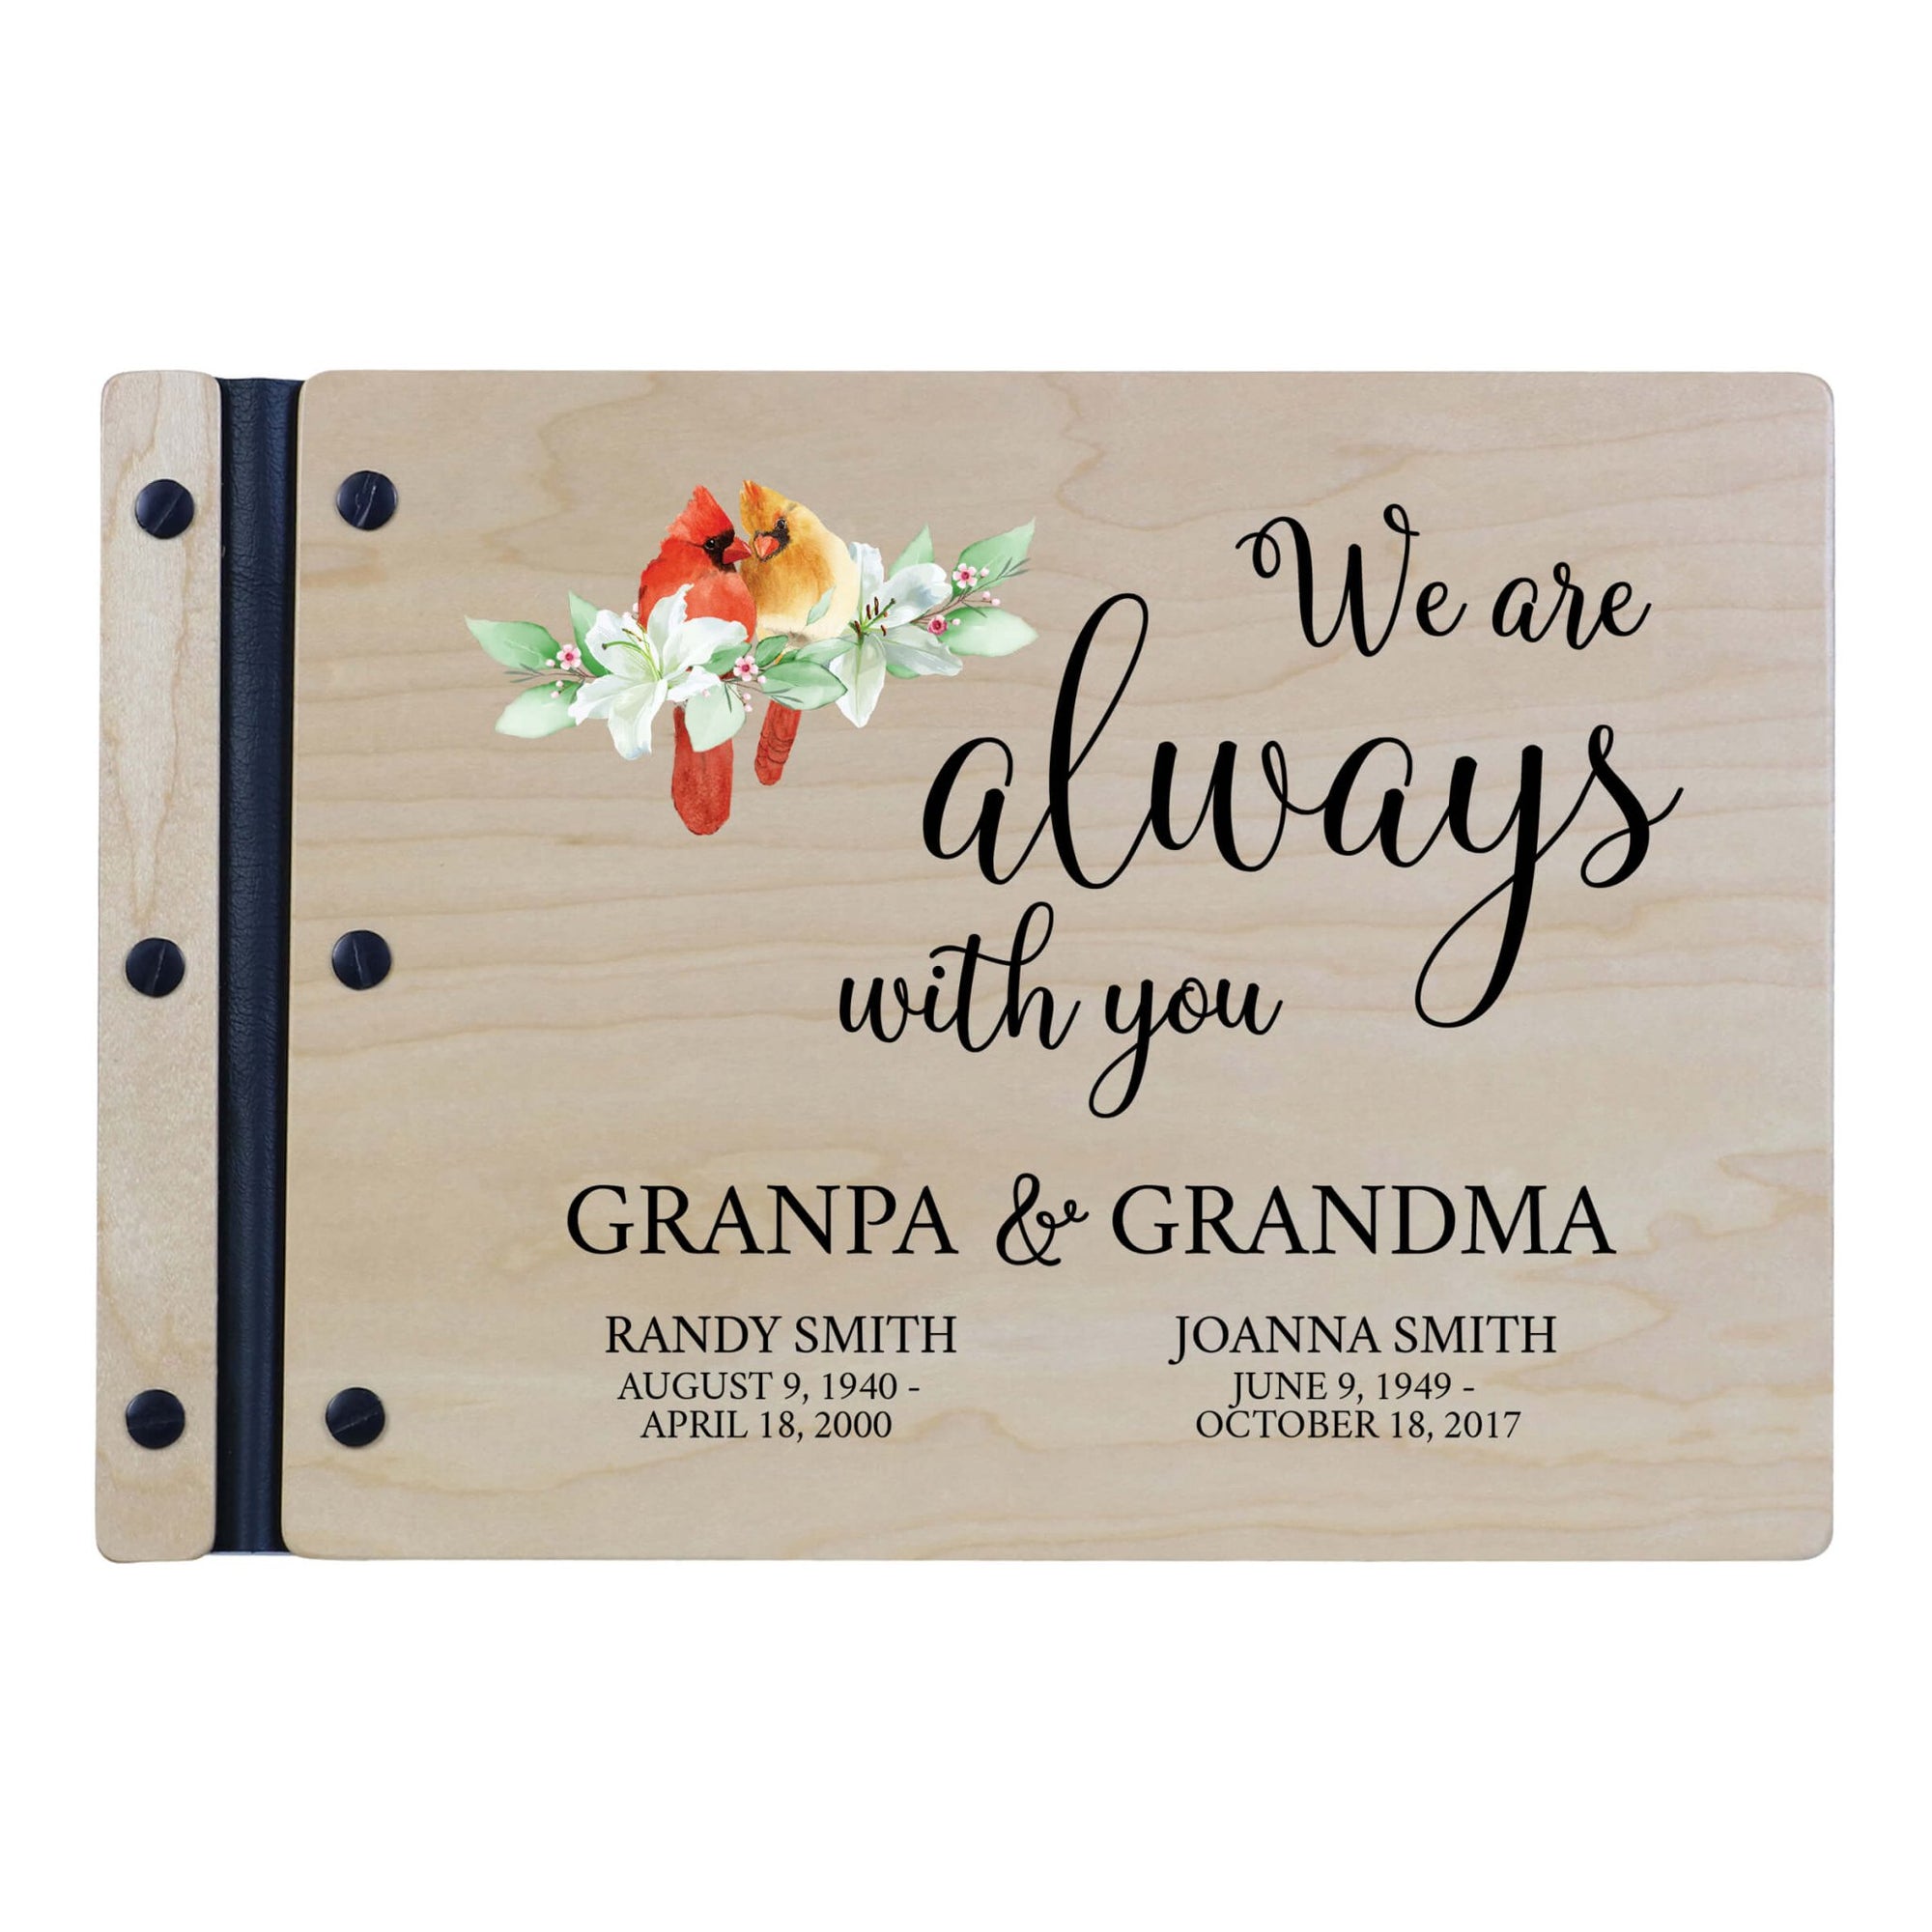 Personalized Funeral Wooden Guestbook for Memorial Service - We Are Always With You - LifeSong Milestones